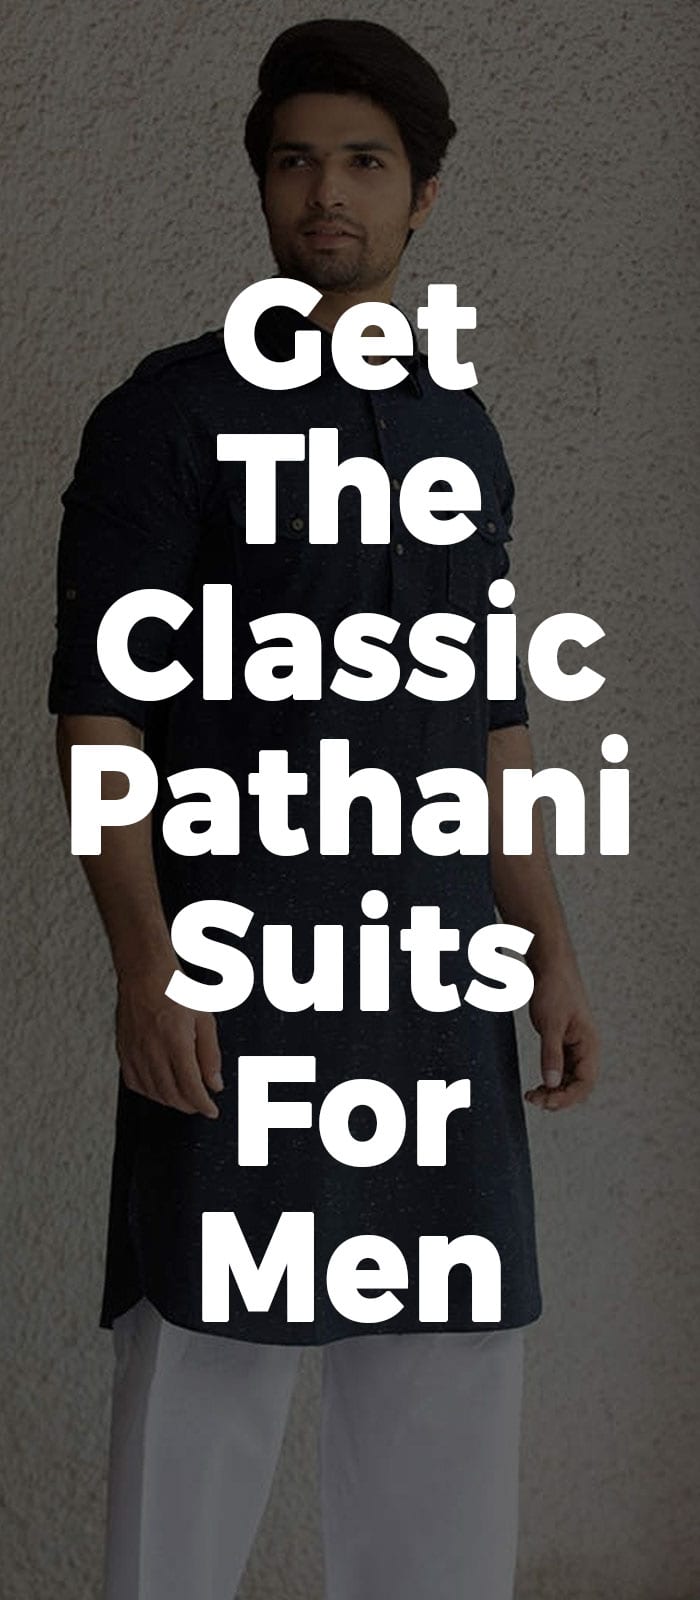 Get The Classic Pathani Suits For Men